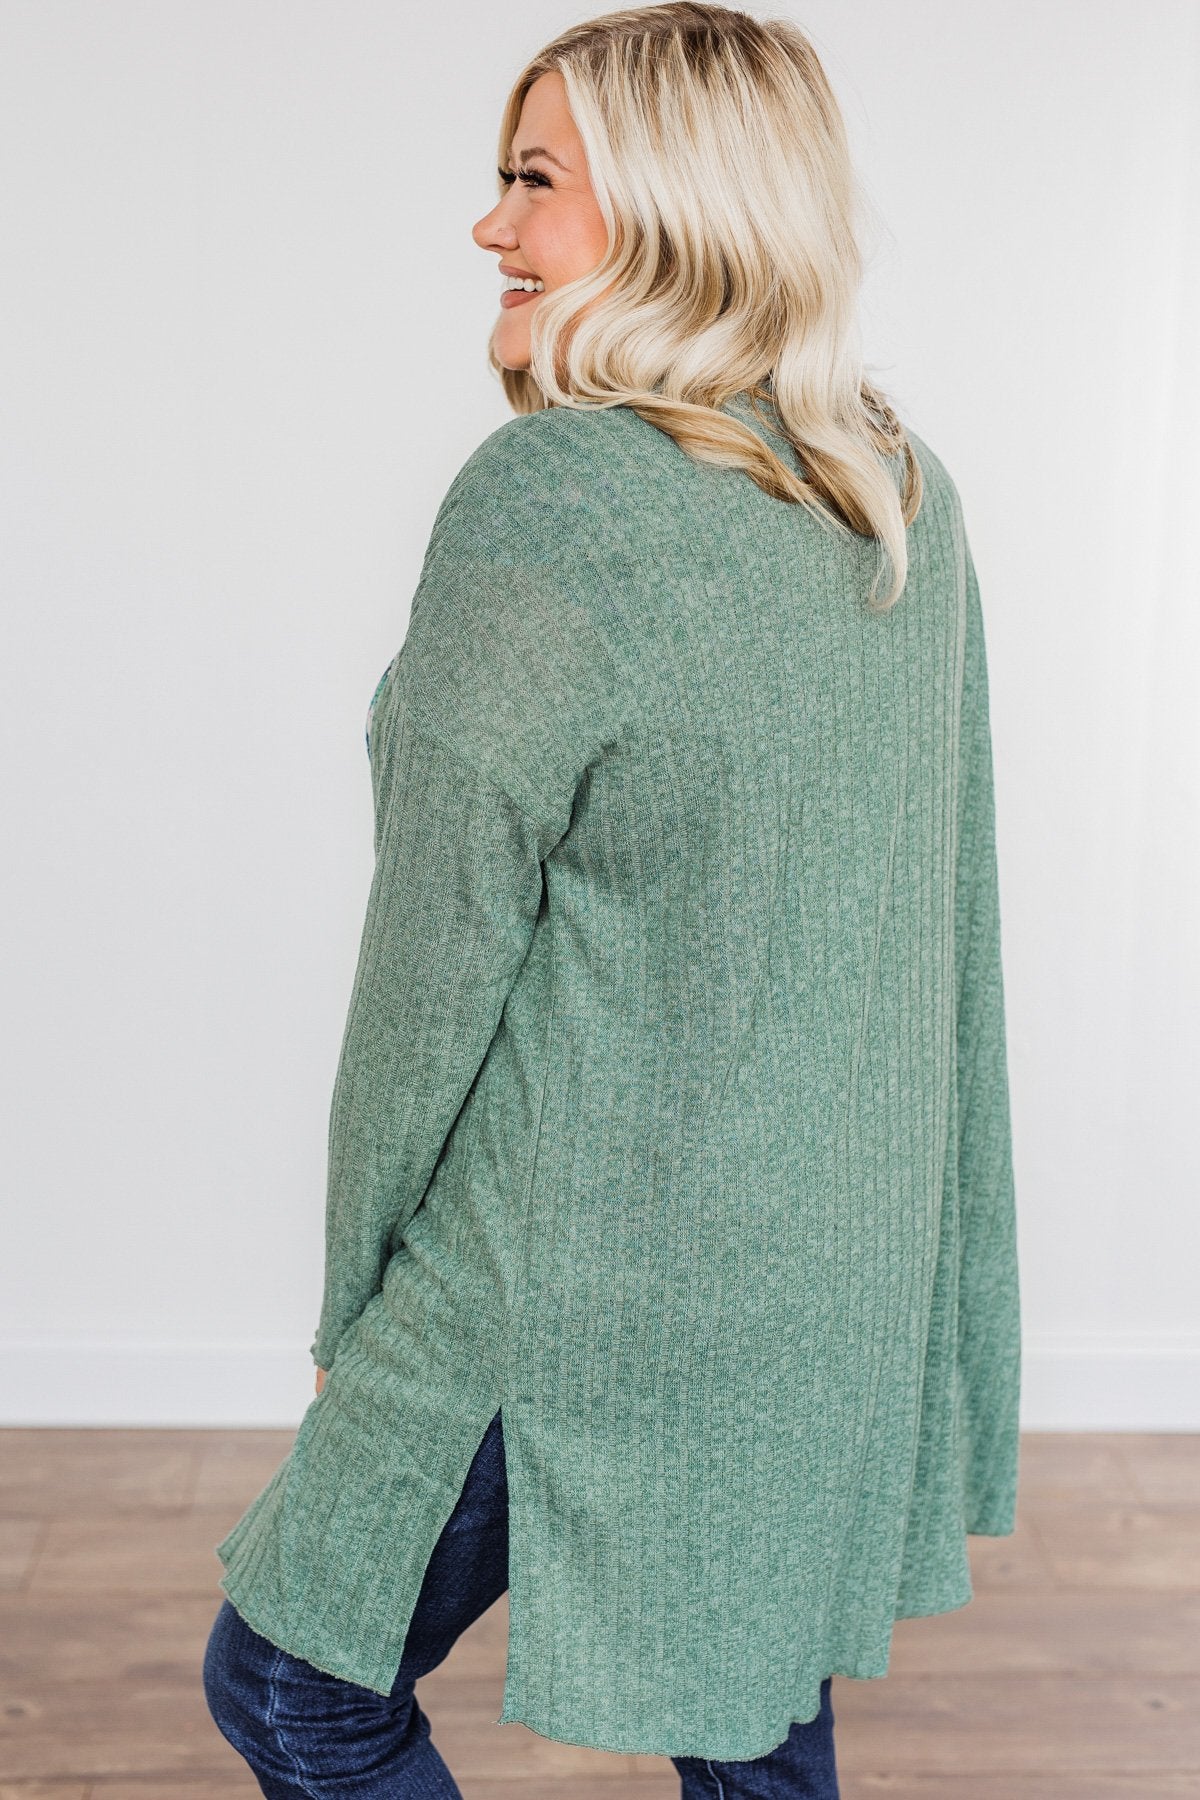 Life As We Know It Knit Cardigan- Sage